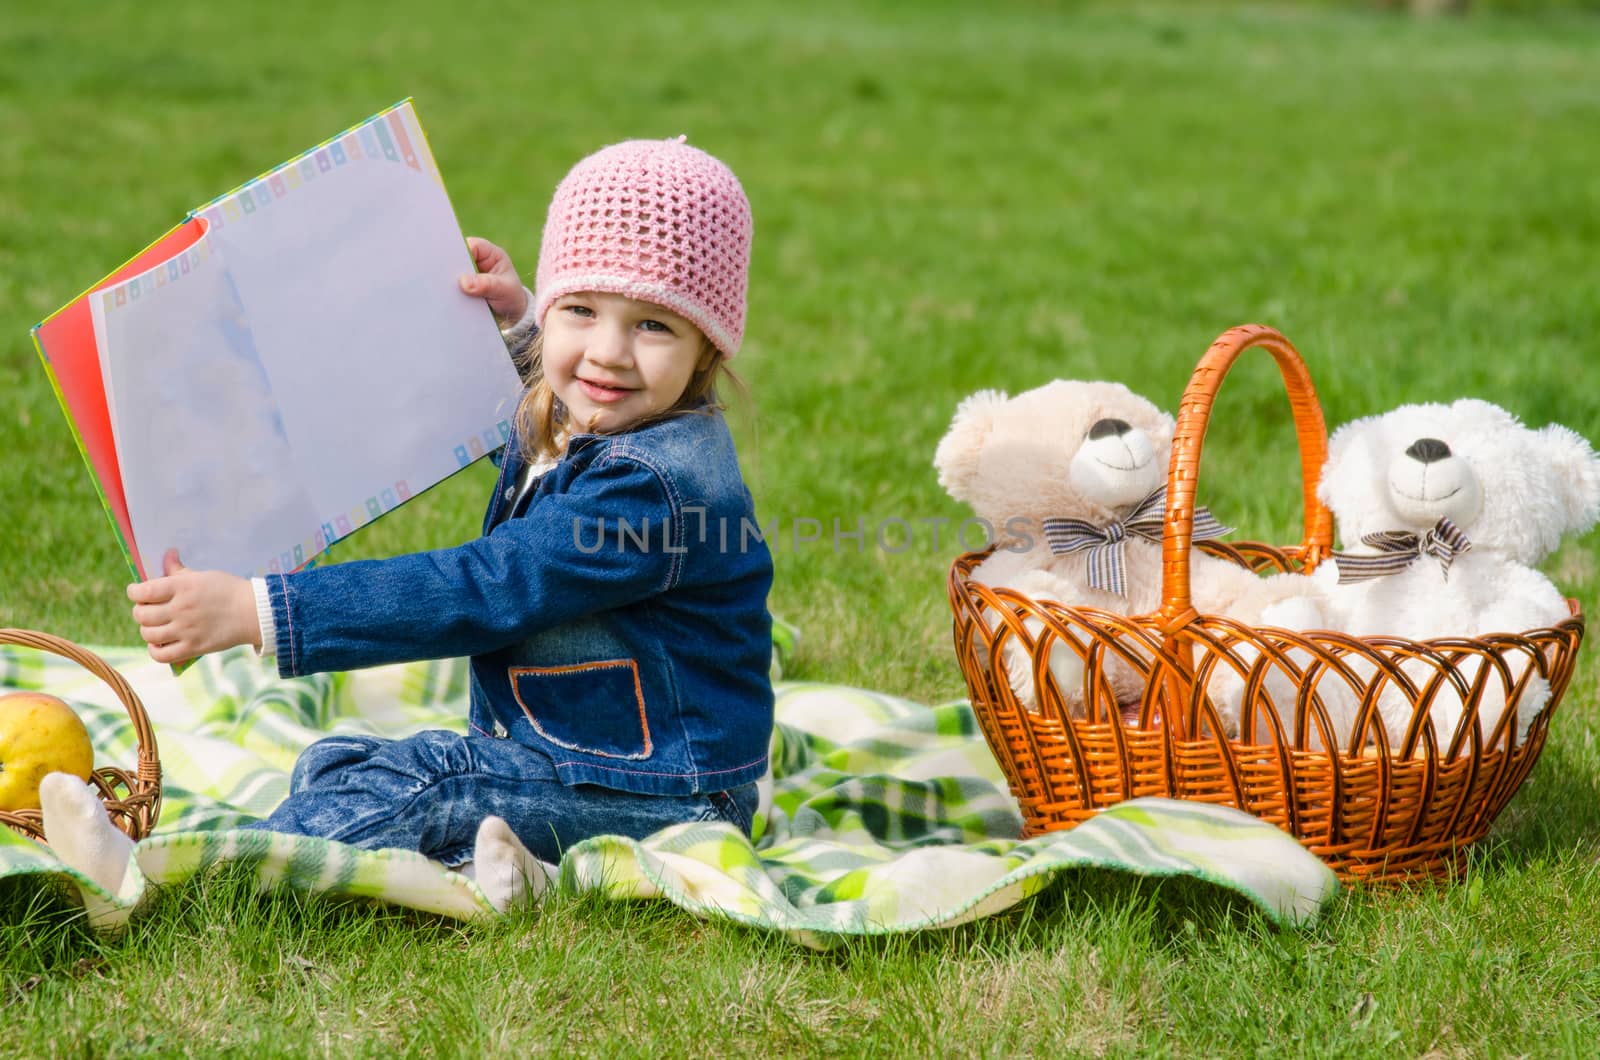 Happy girl showing the book on picnic by Madhourse